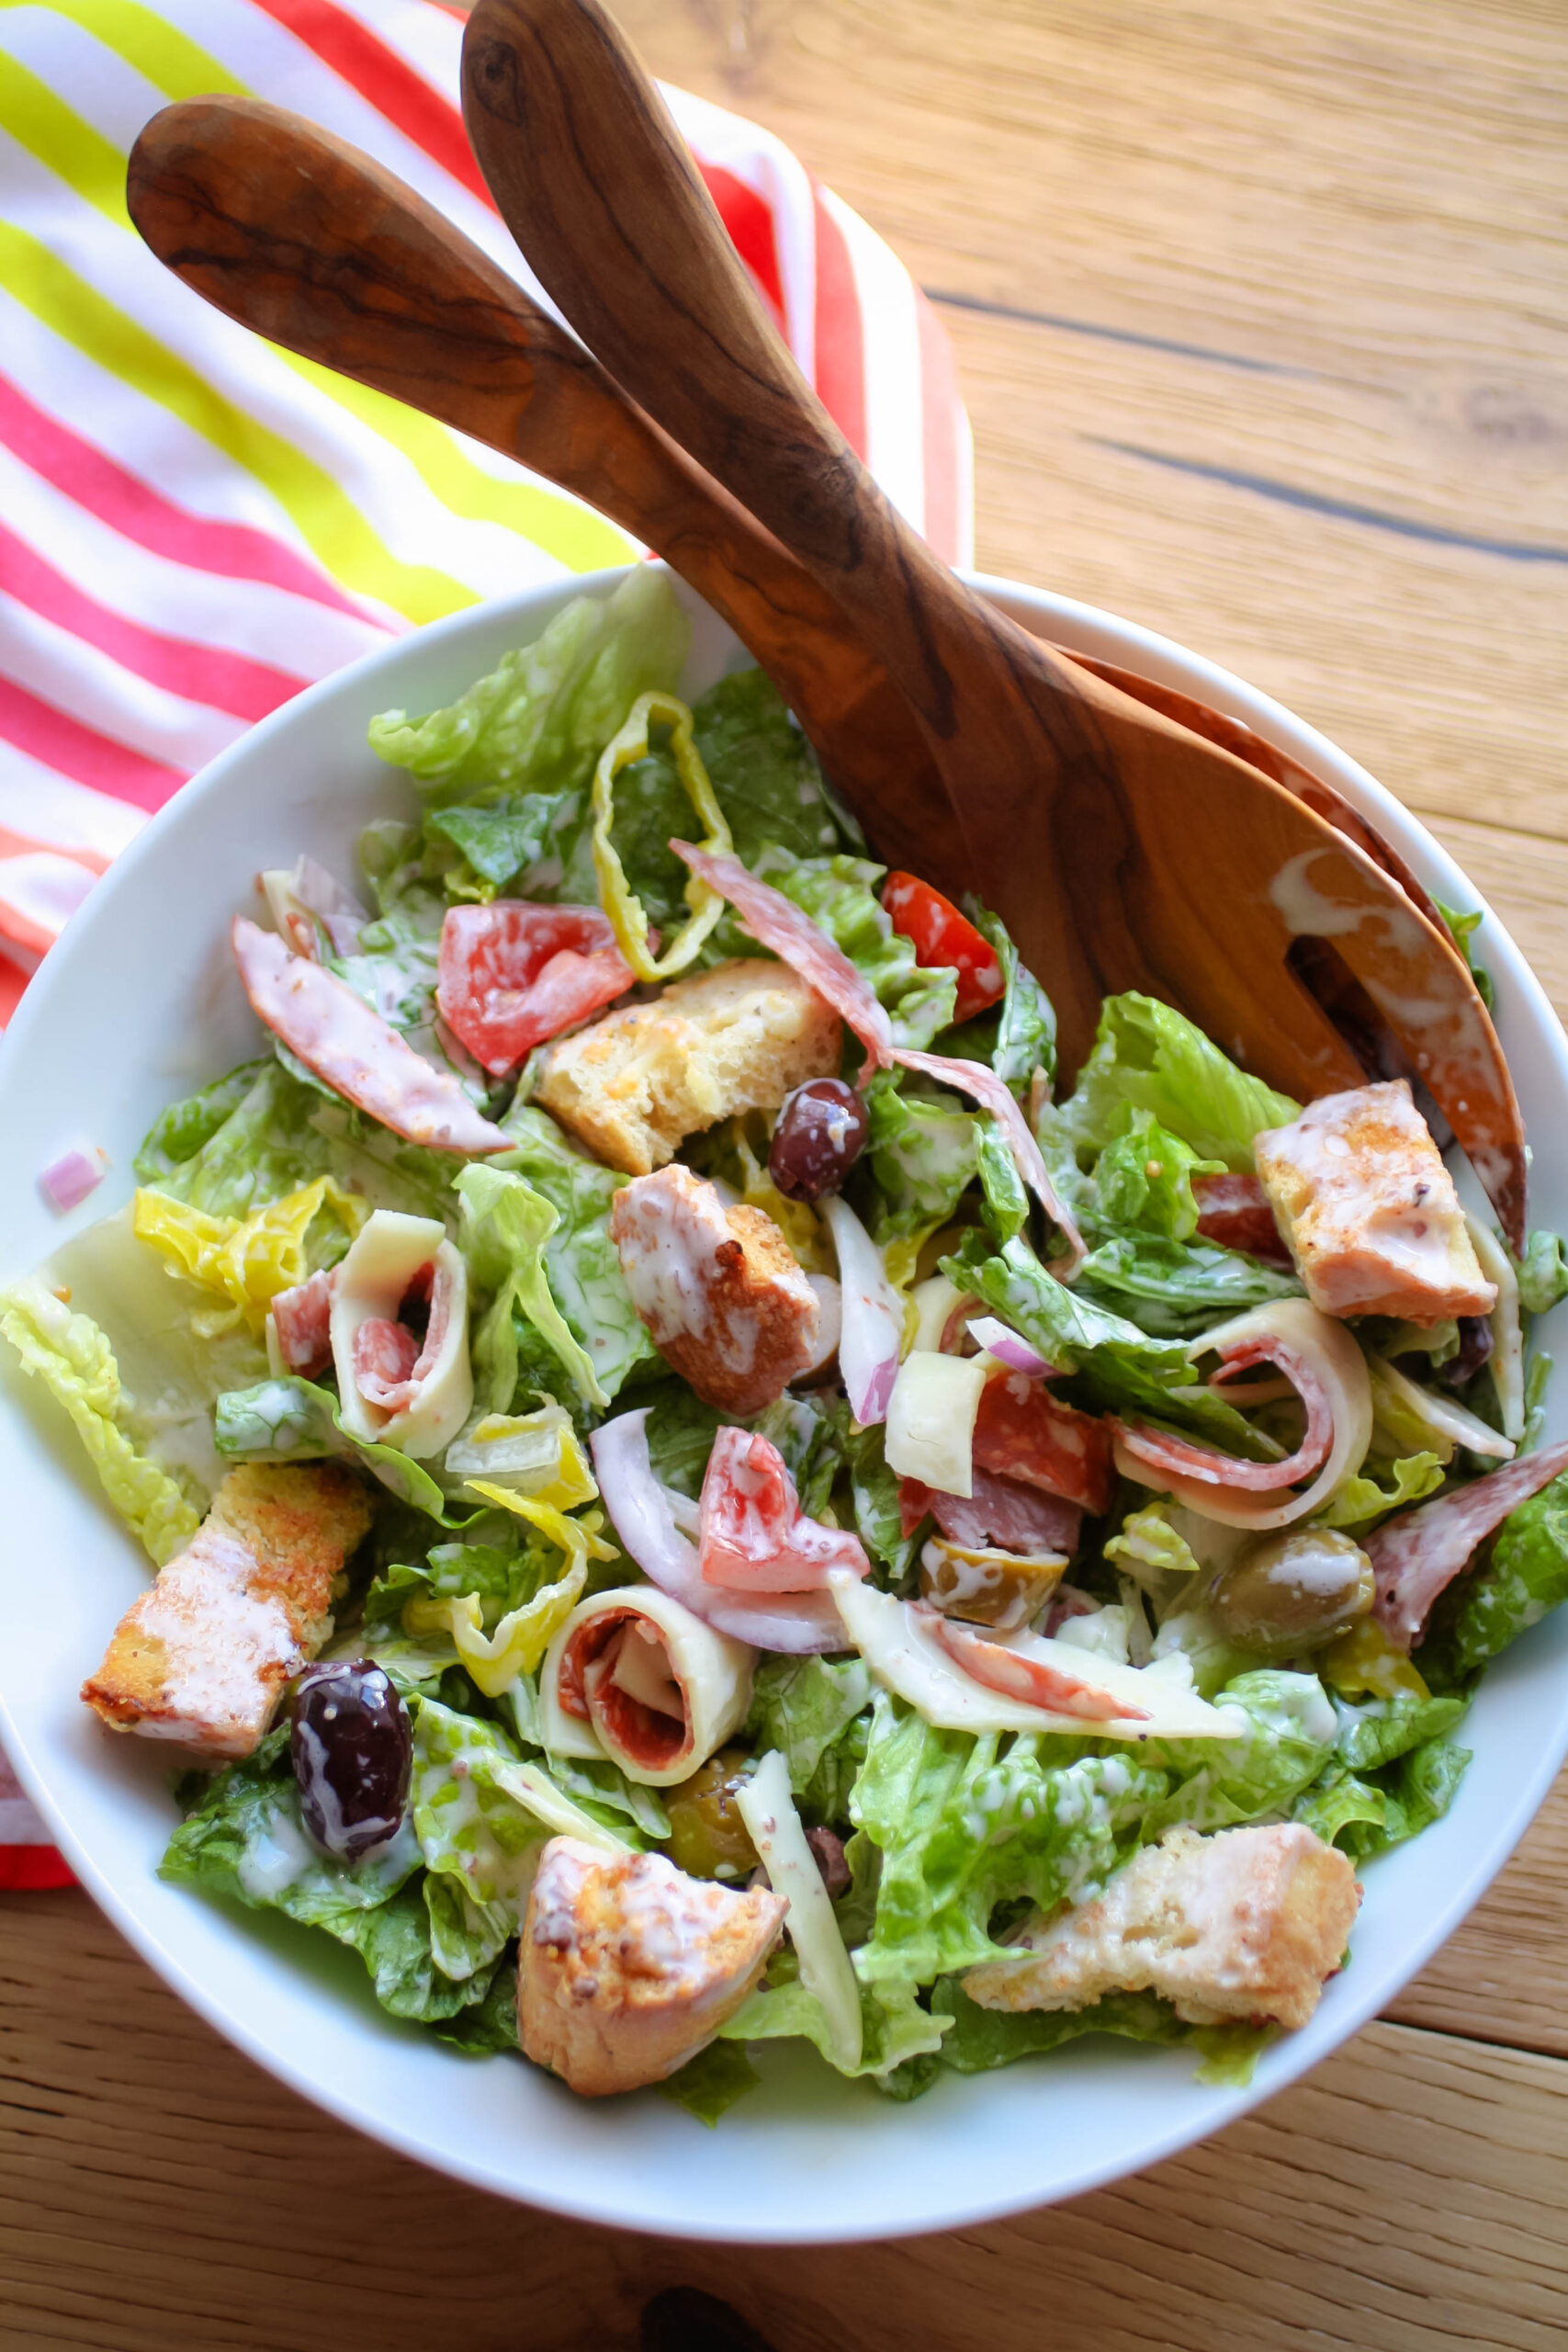 This Italian Sub Salad makes a hearty meal you can personalize with your favorite ingredients.